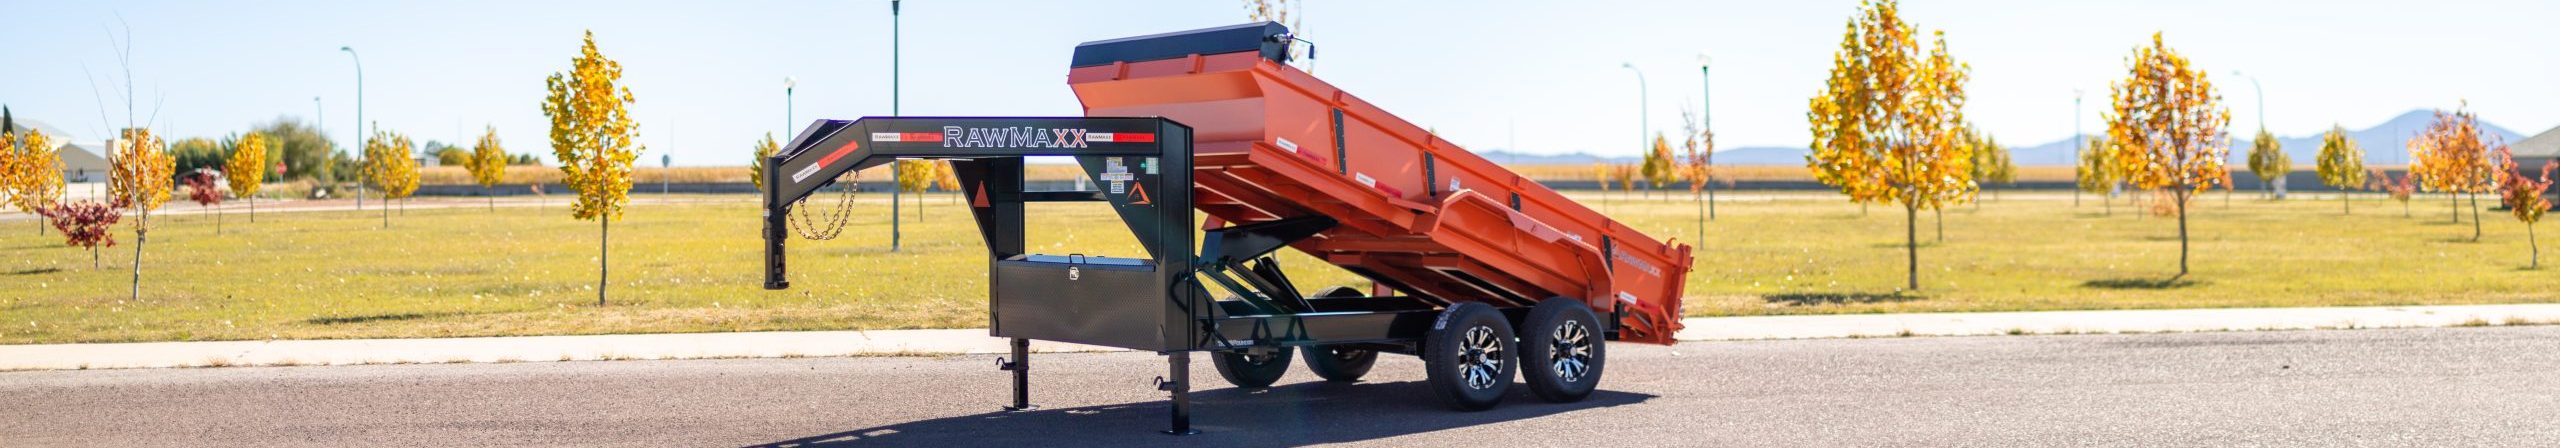 Best Dump Trailers for Sale Near Your Area in the USA - RawMaxx